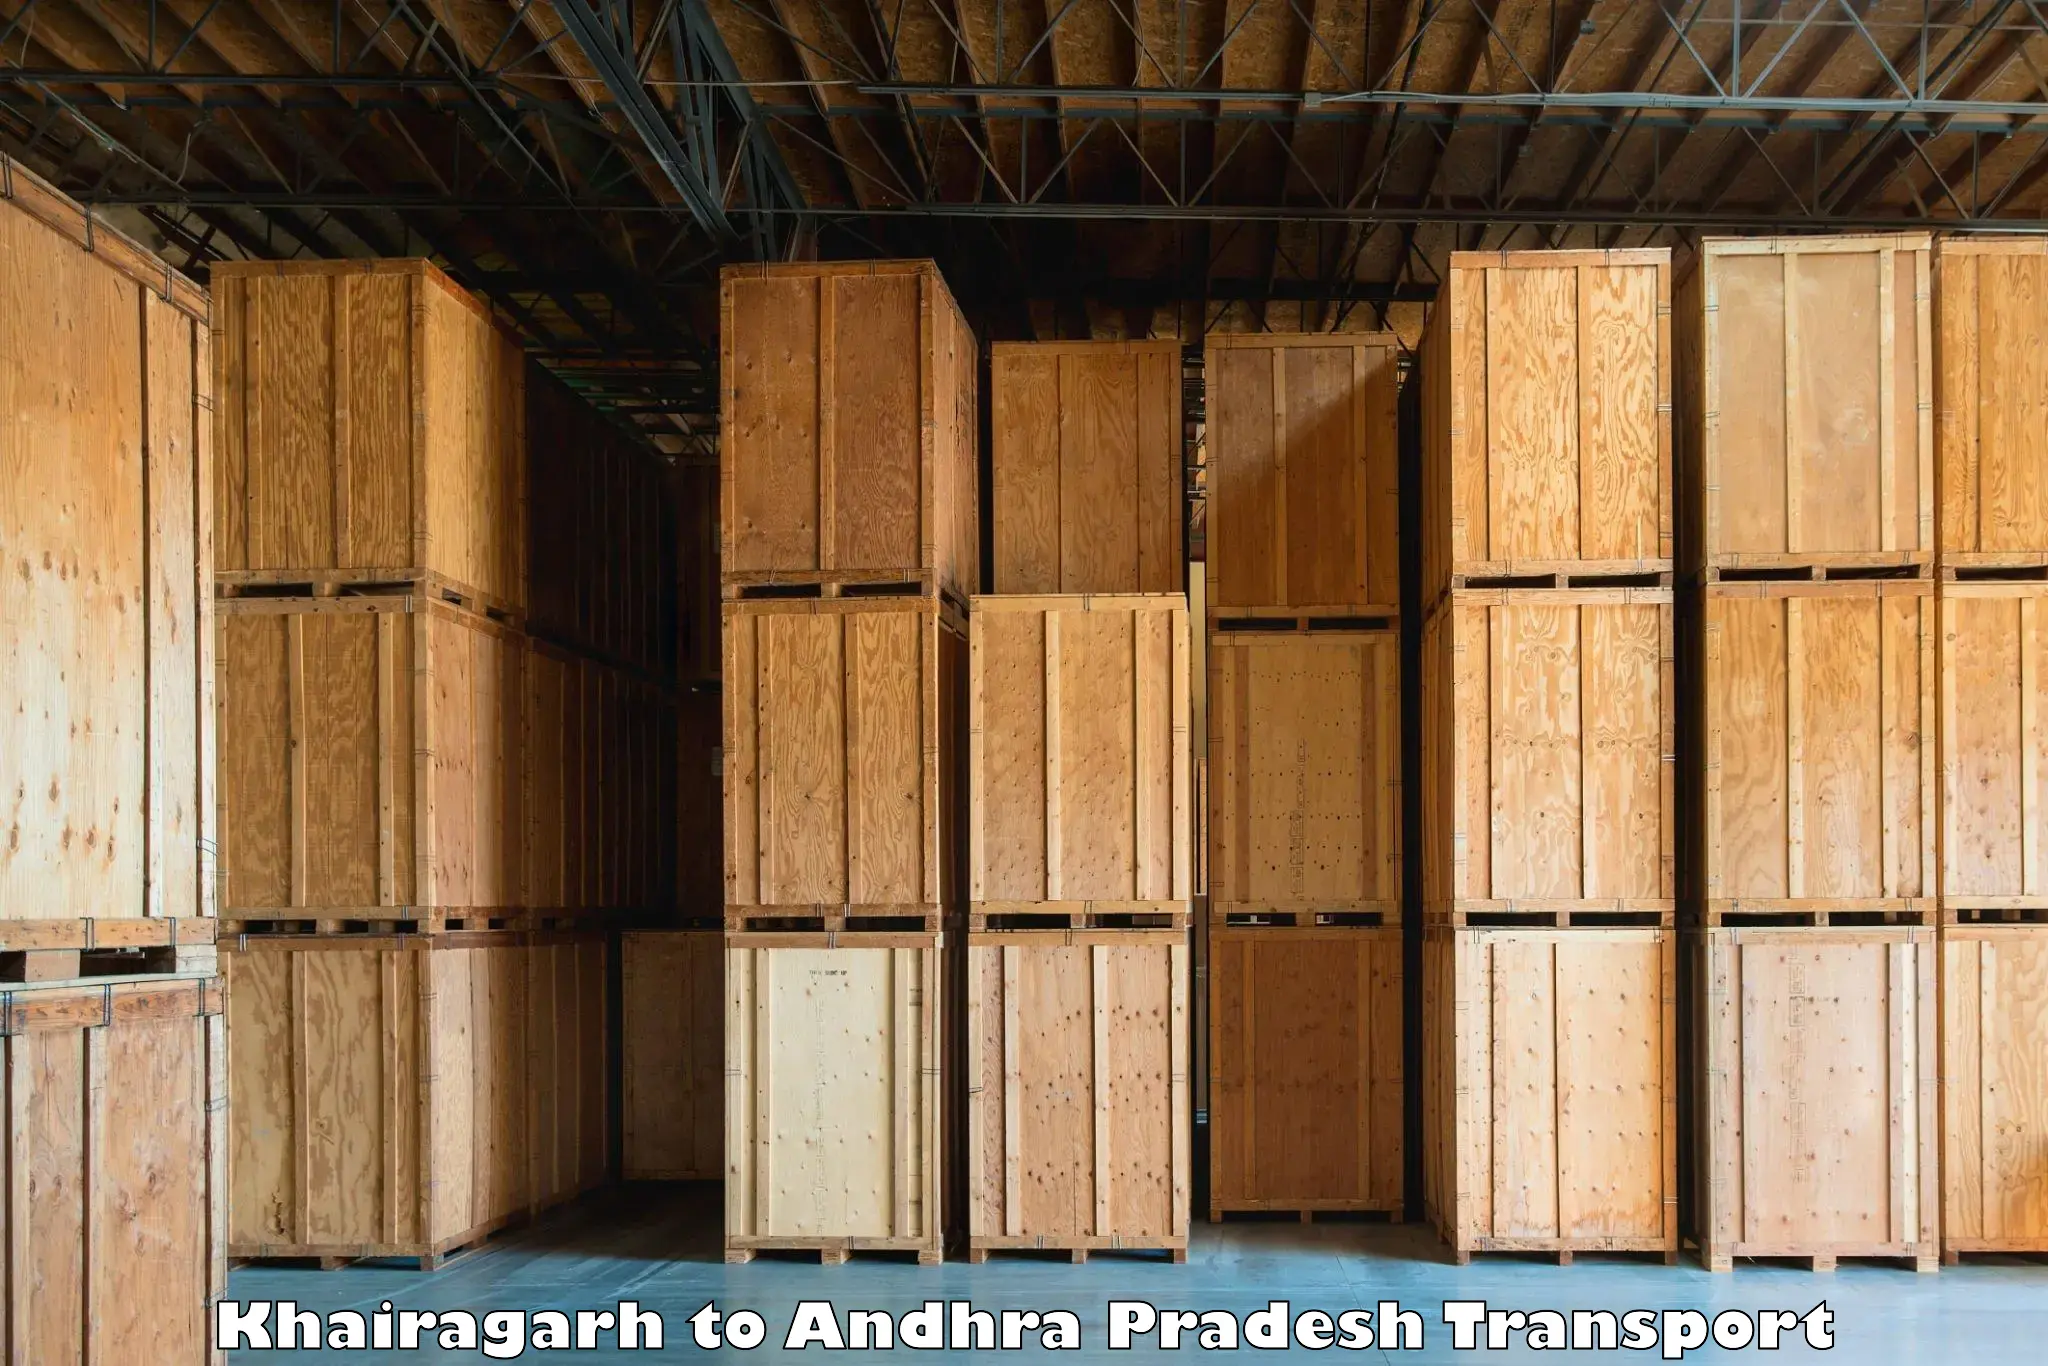 Container transport service Khairagarh to Gollaprollu